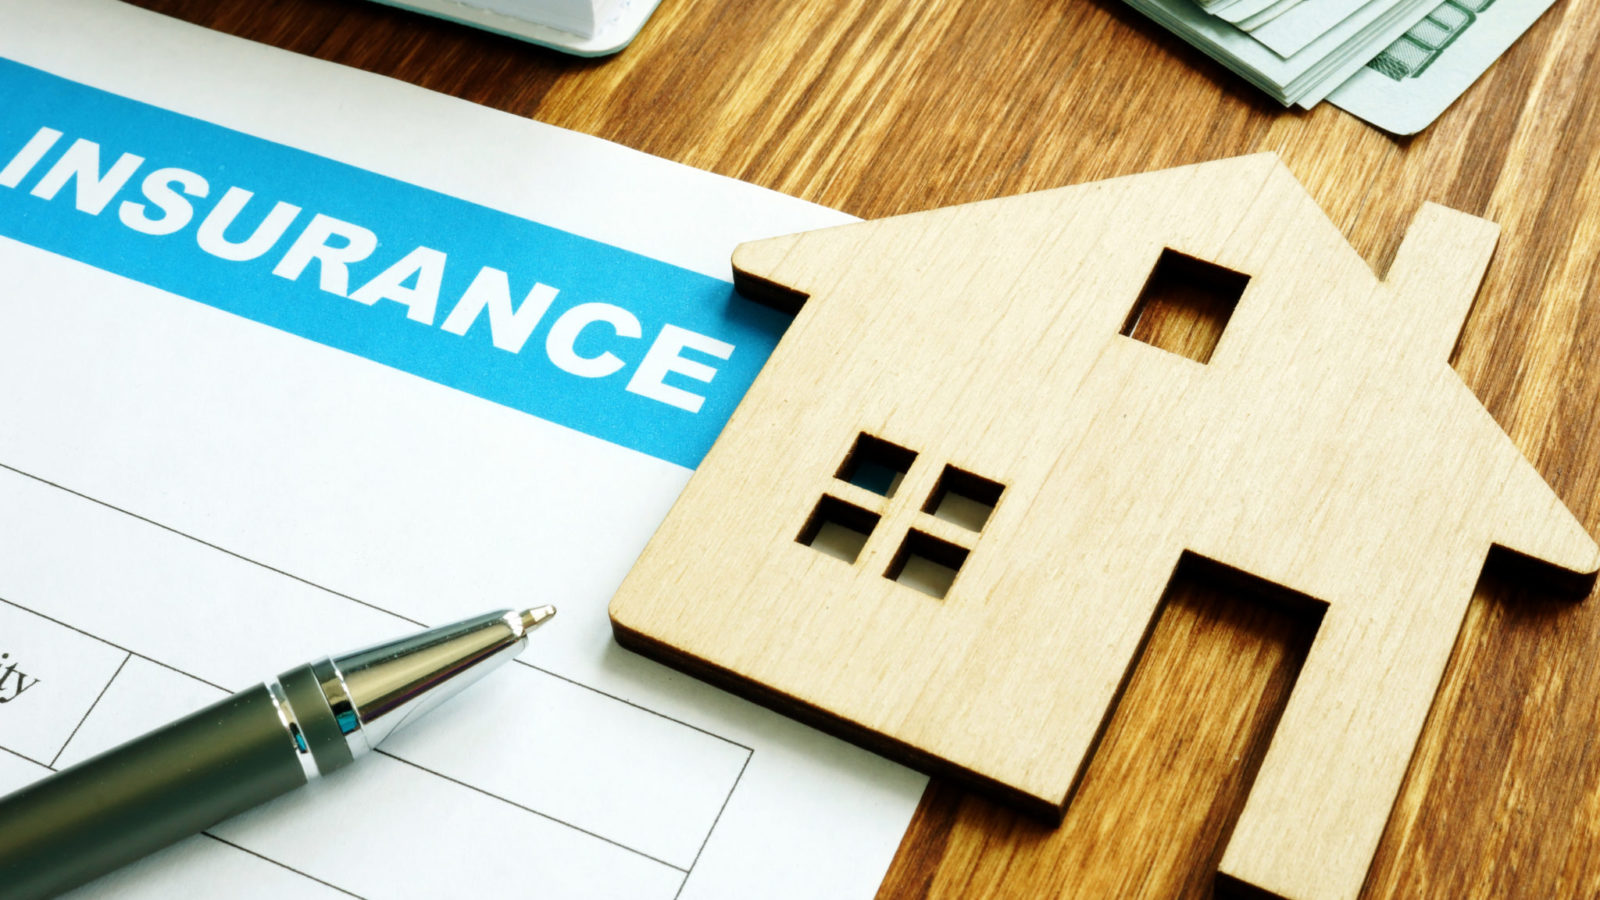 House insurance form for homeowners and model of home.